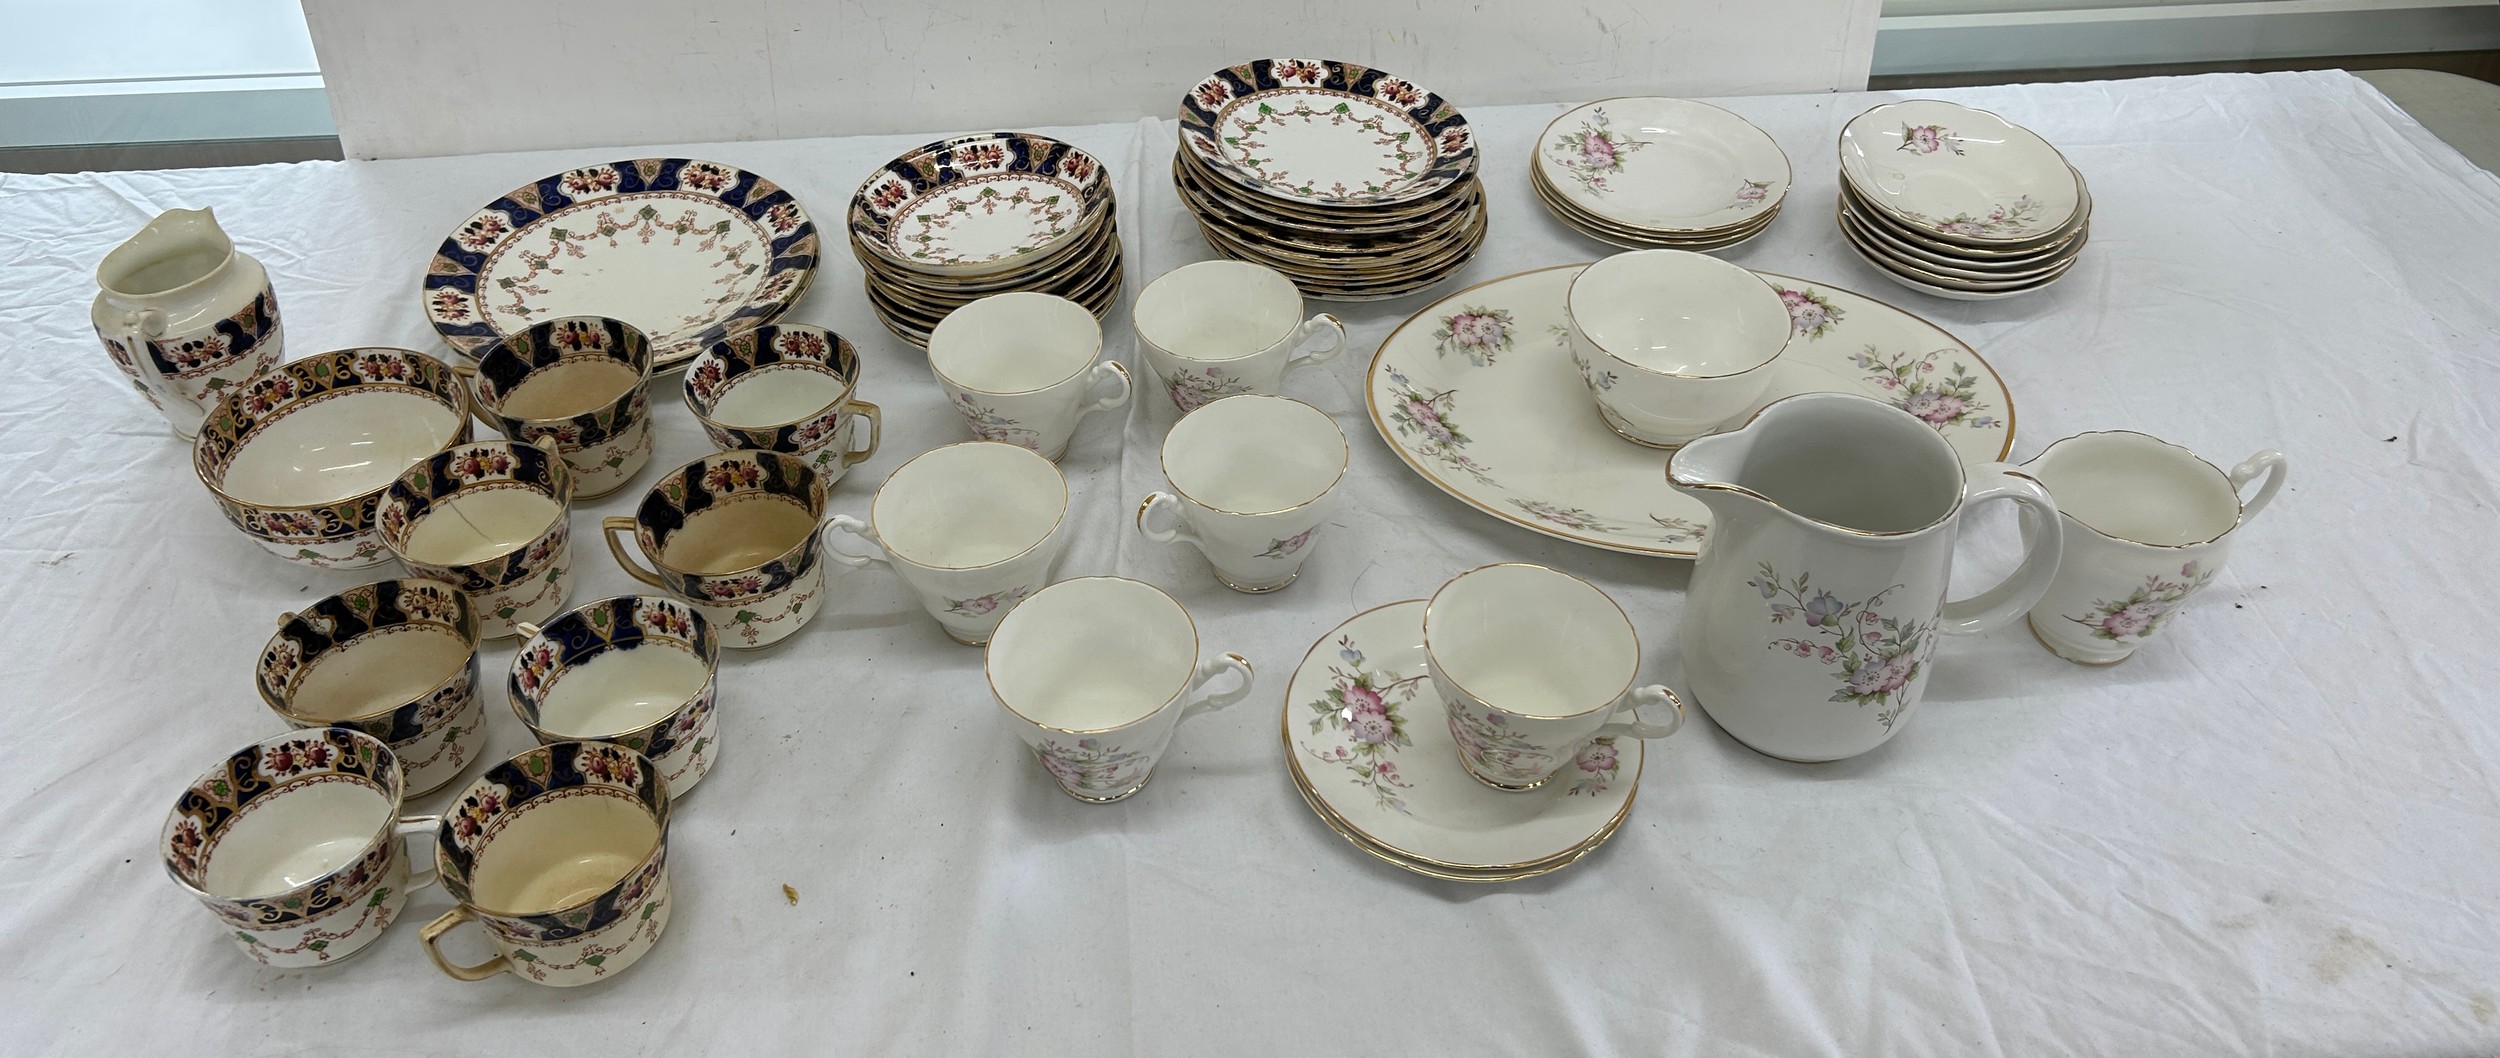 Royal Albian and a royal stone part tea service - Image 2 of 5